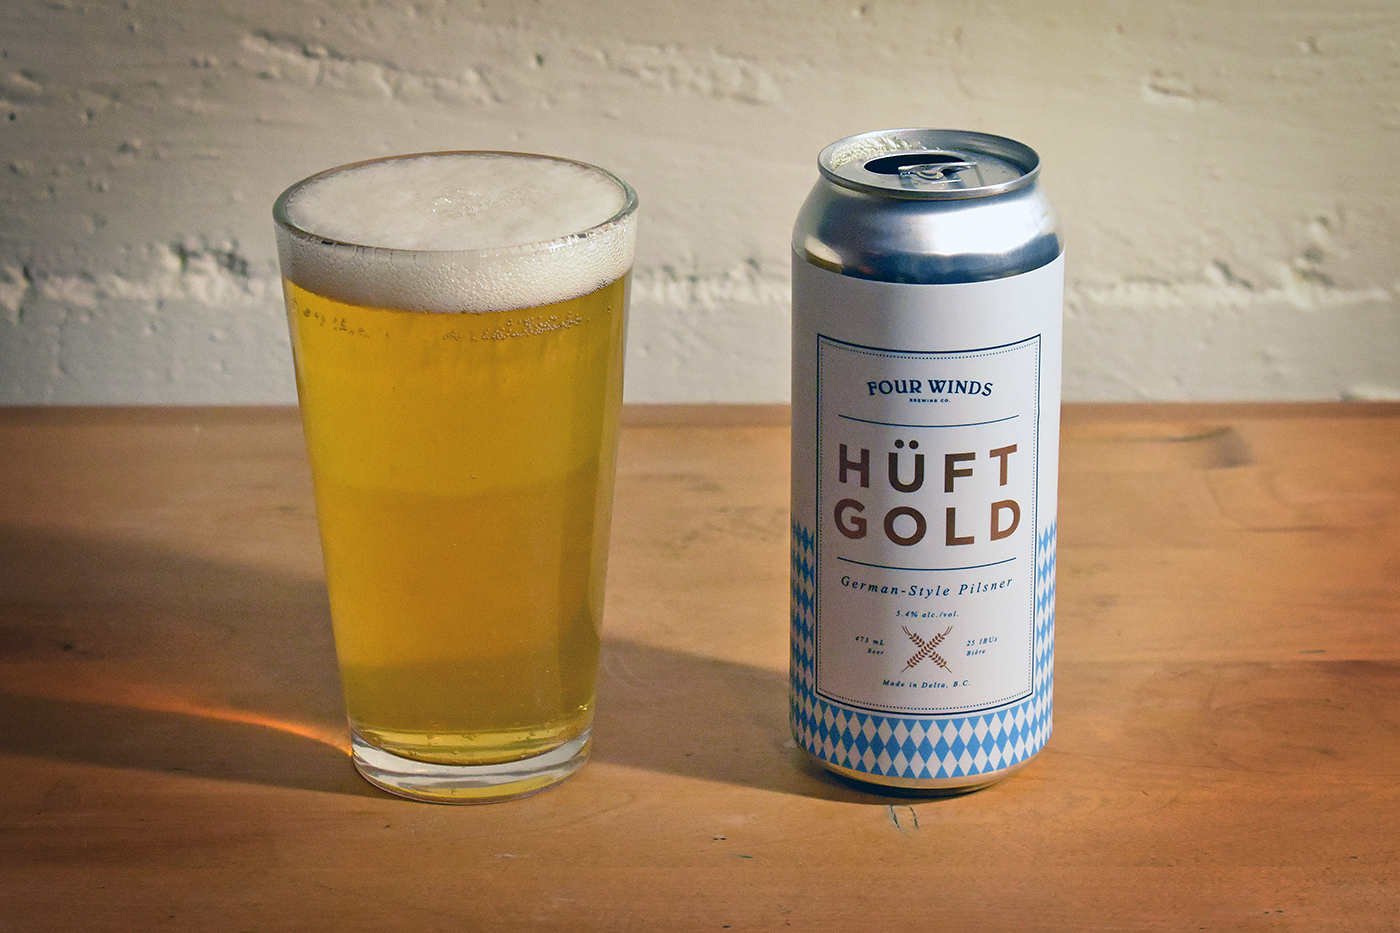 Hüftgold by Four Winds Brewing